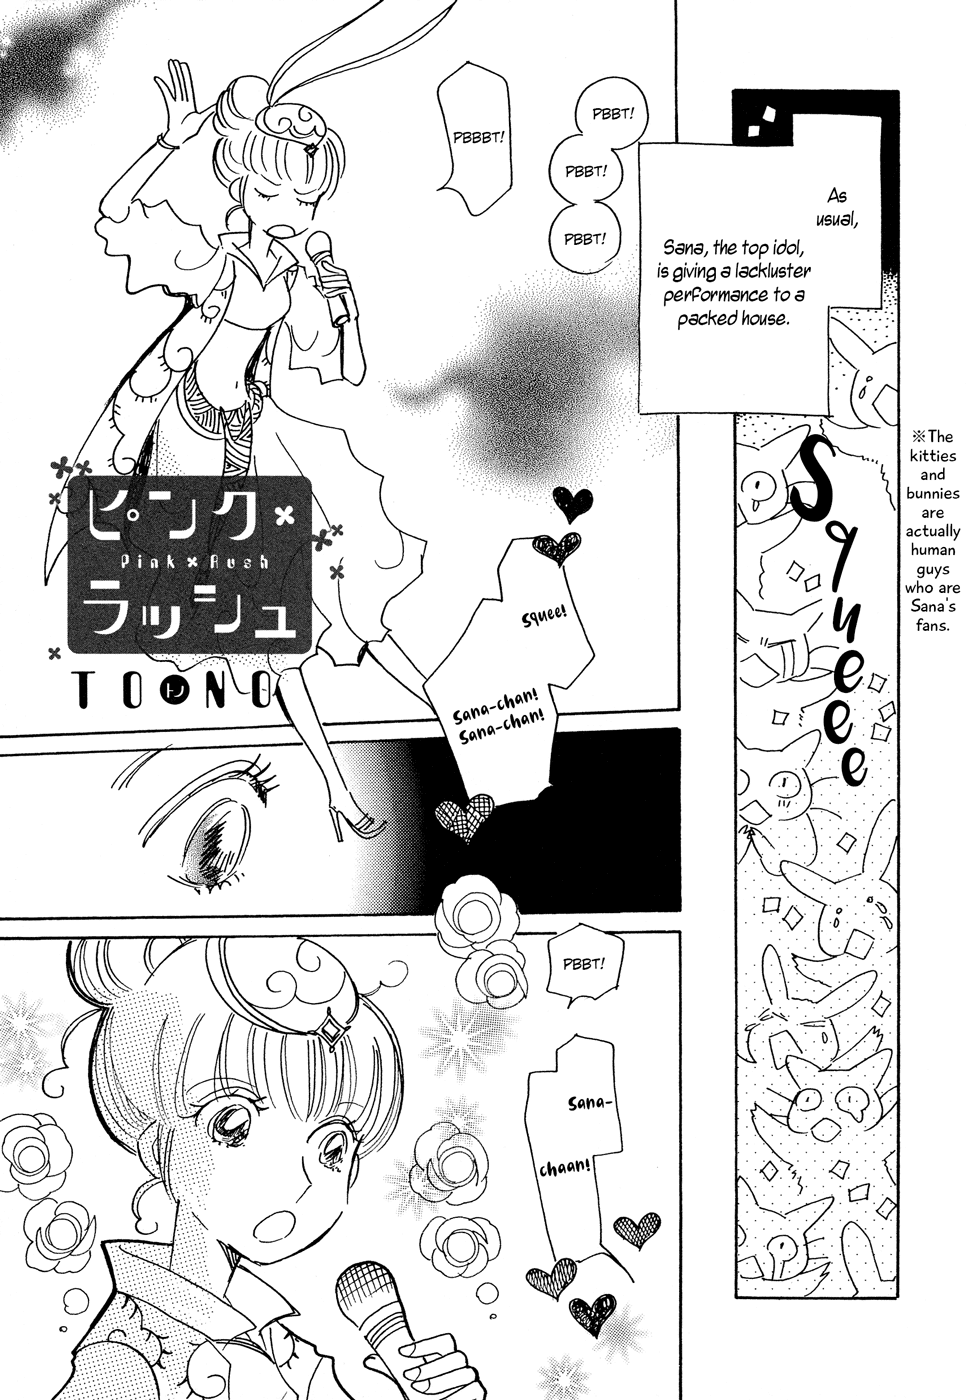 Pink Rush - Page 2